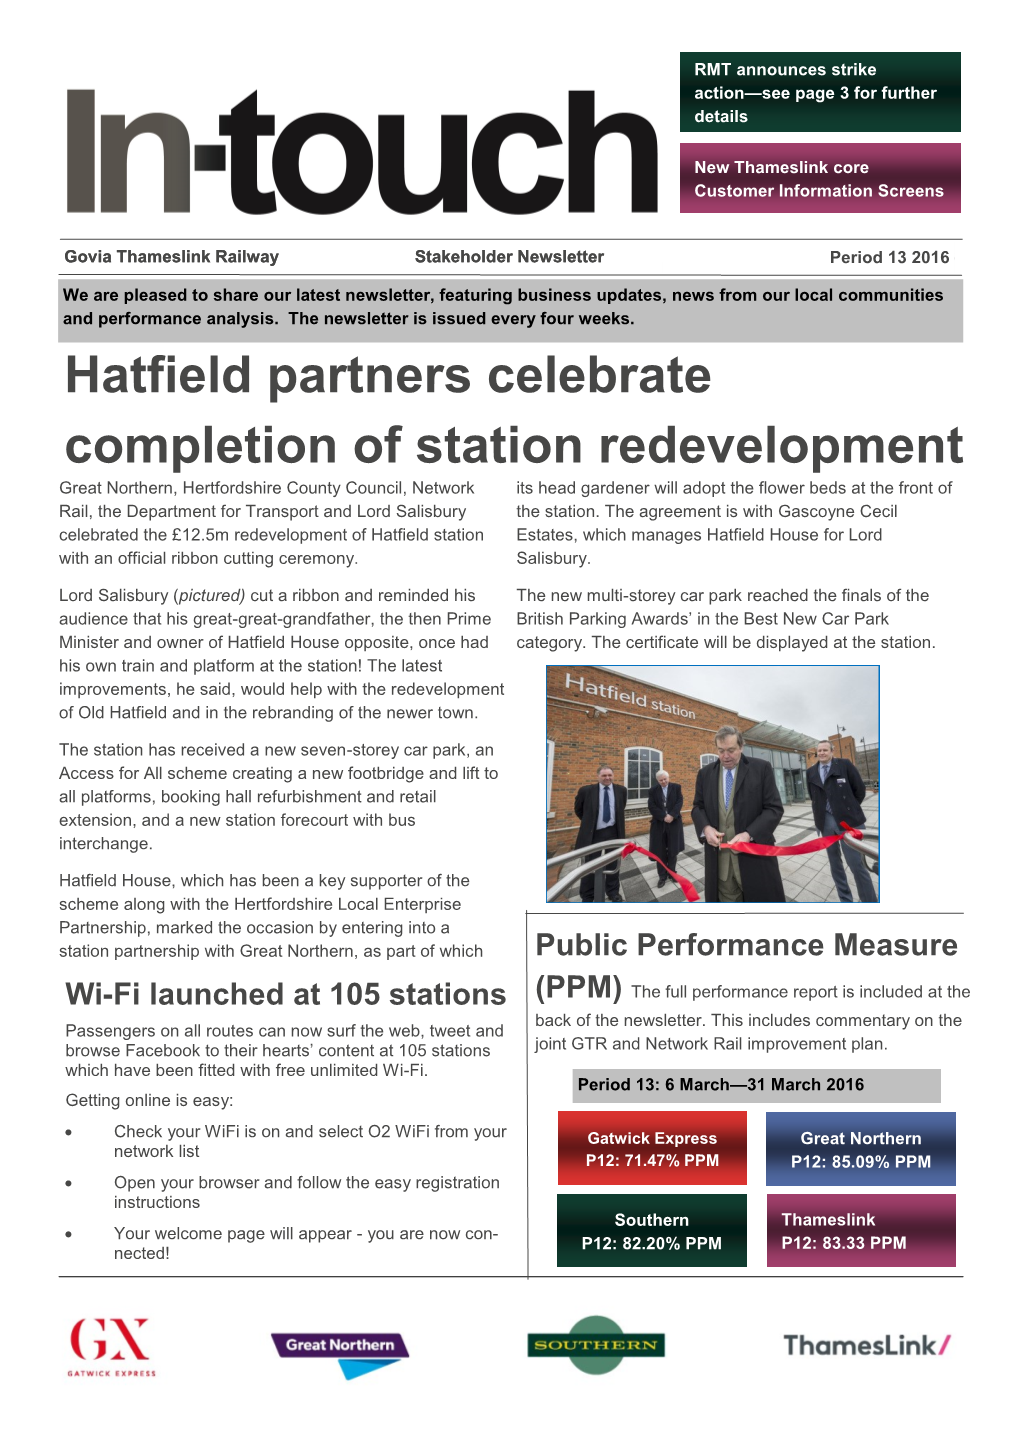 Hatfield Partners Celebrate Completion of Station Redevelopment